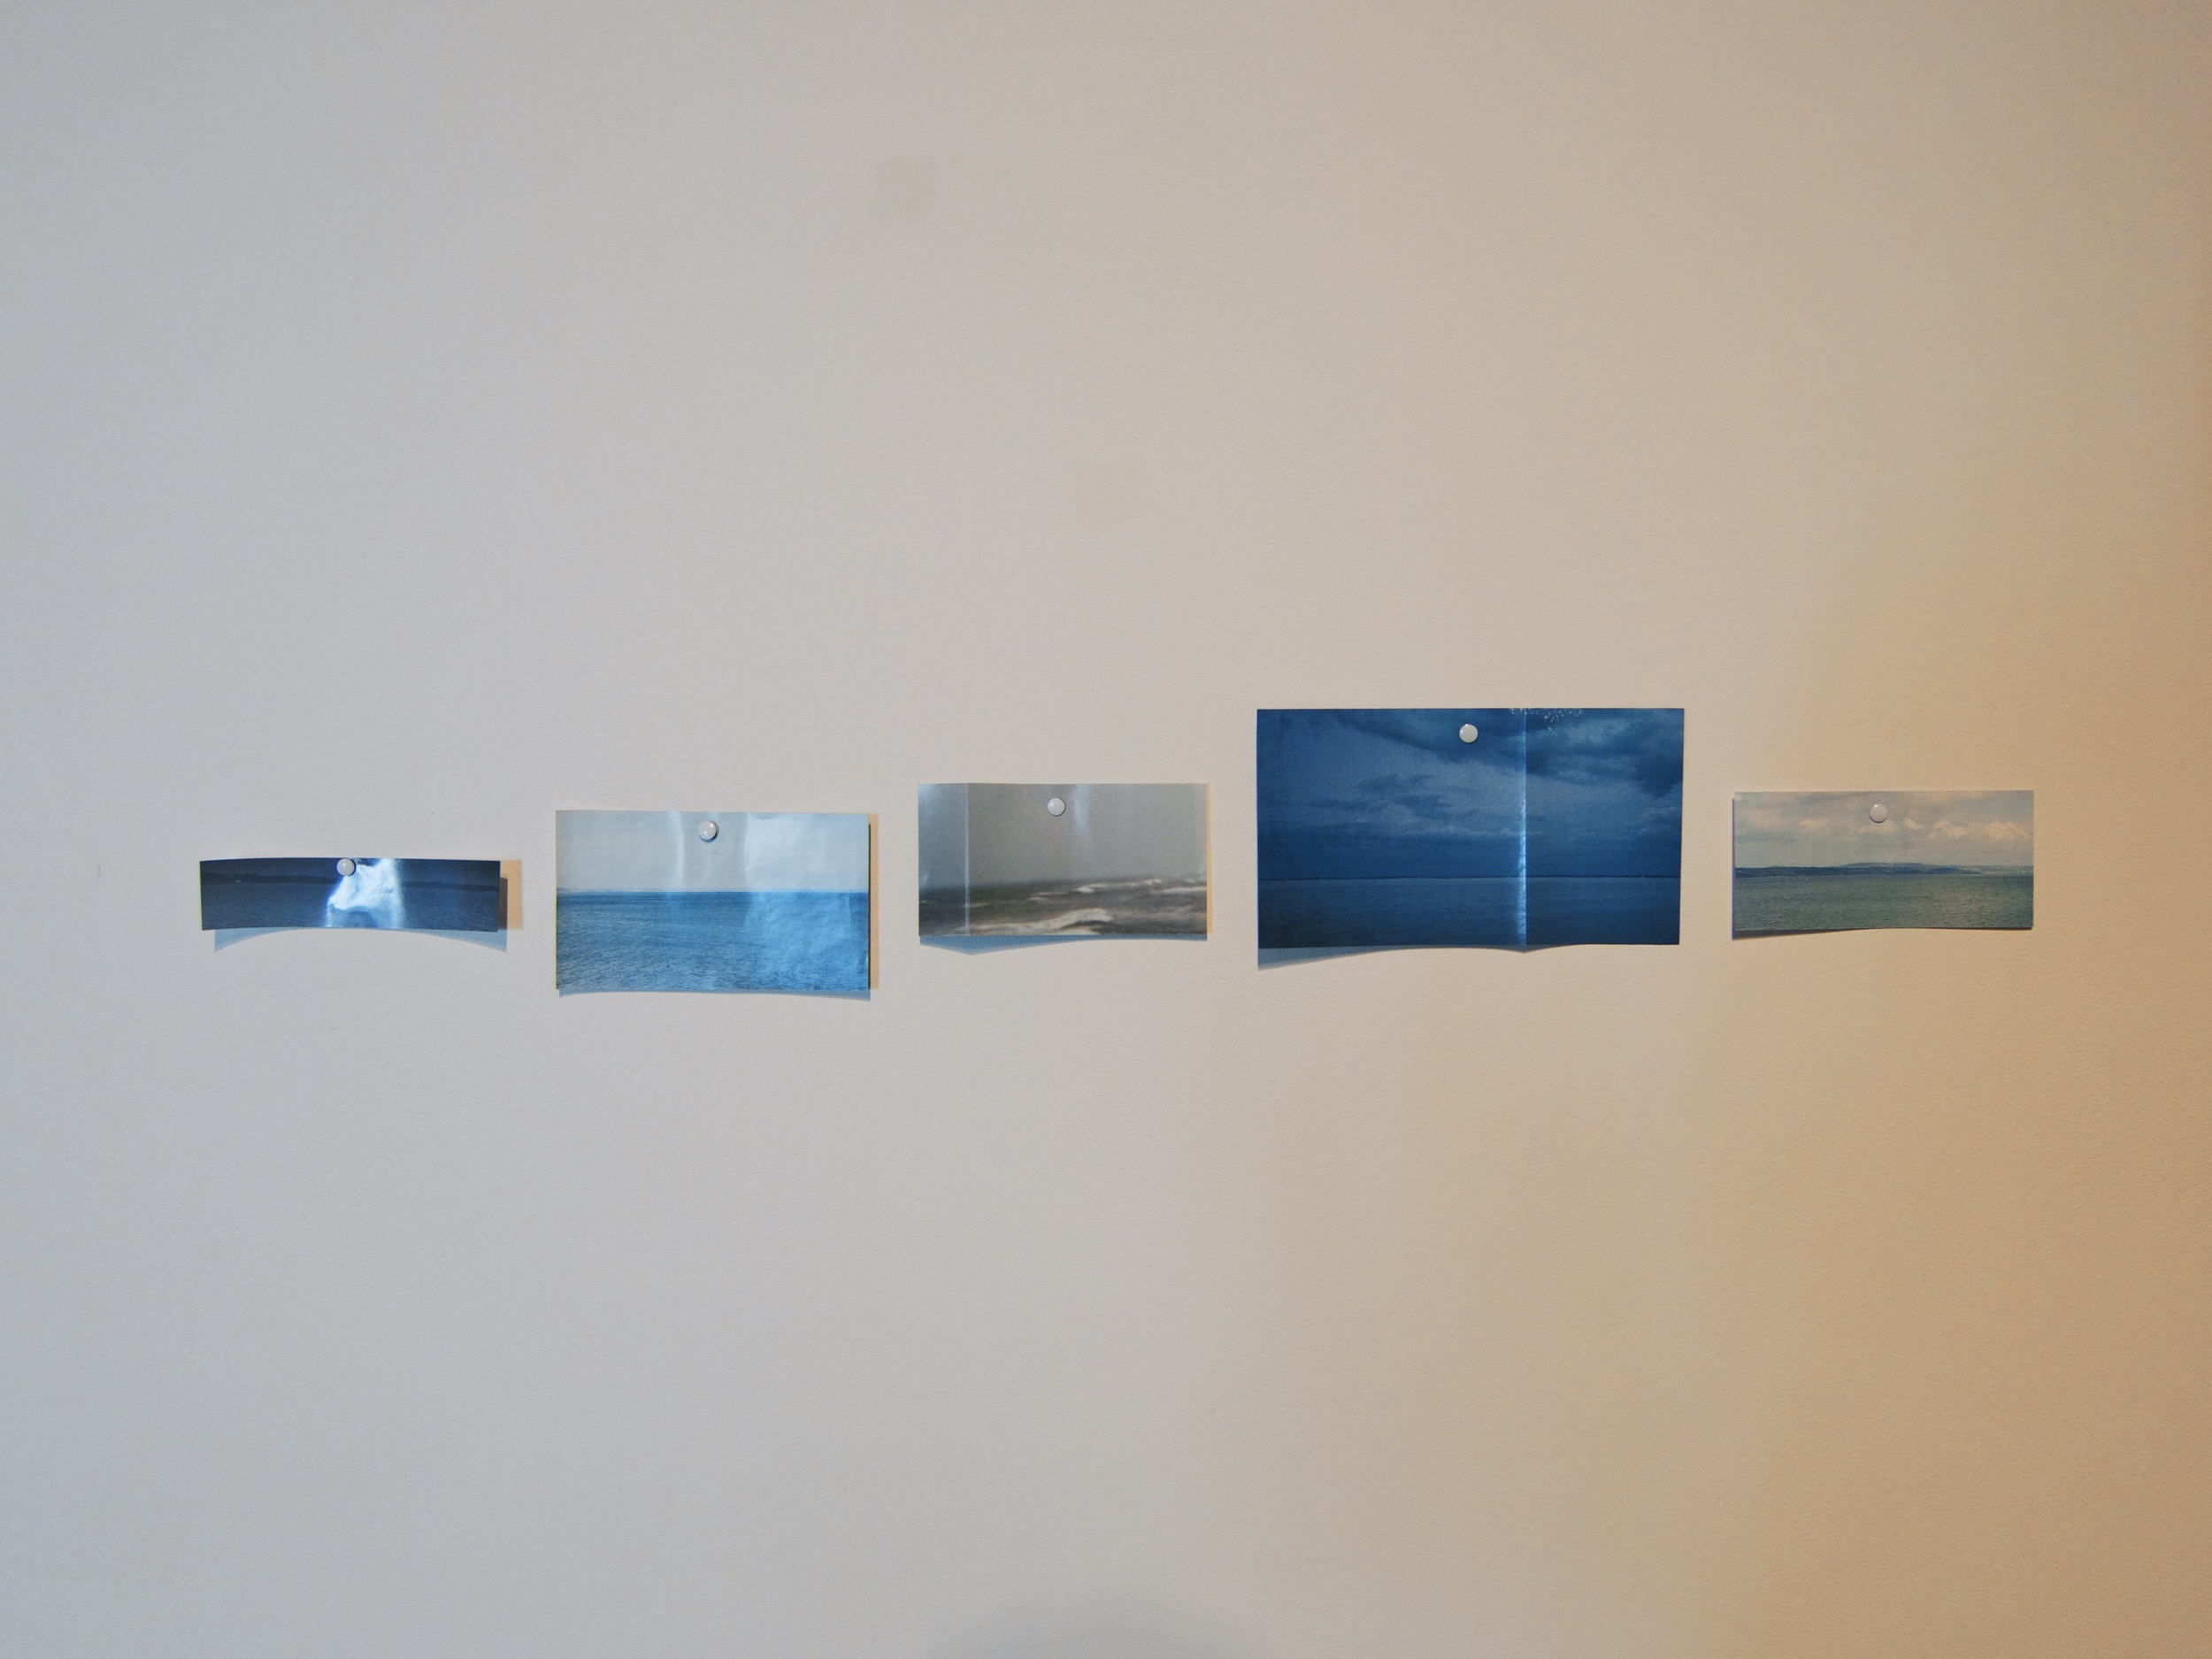  Pinned cut out National Geographic images of horizons, 20x6 inches, 2014. 